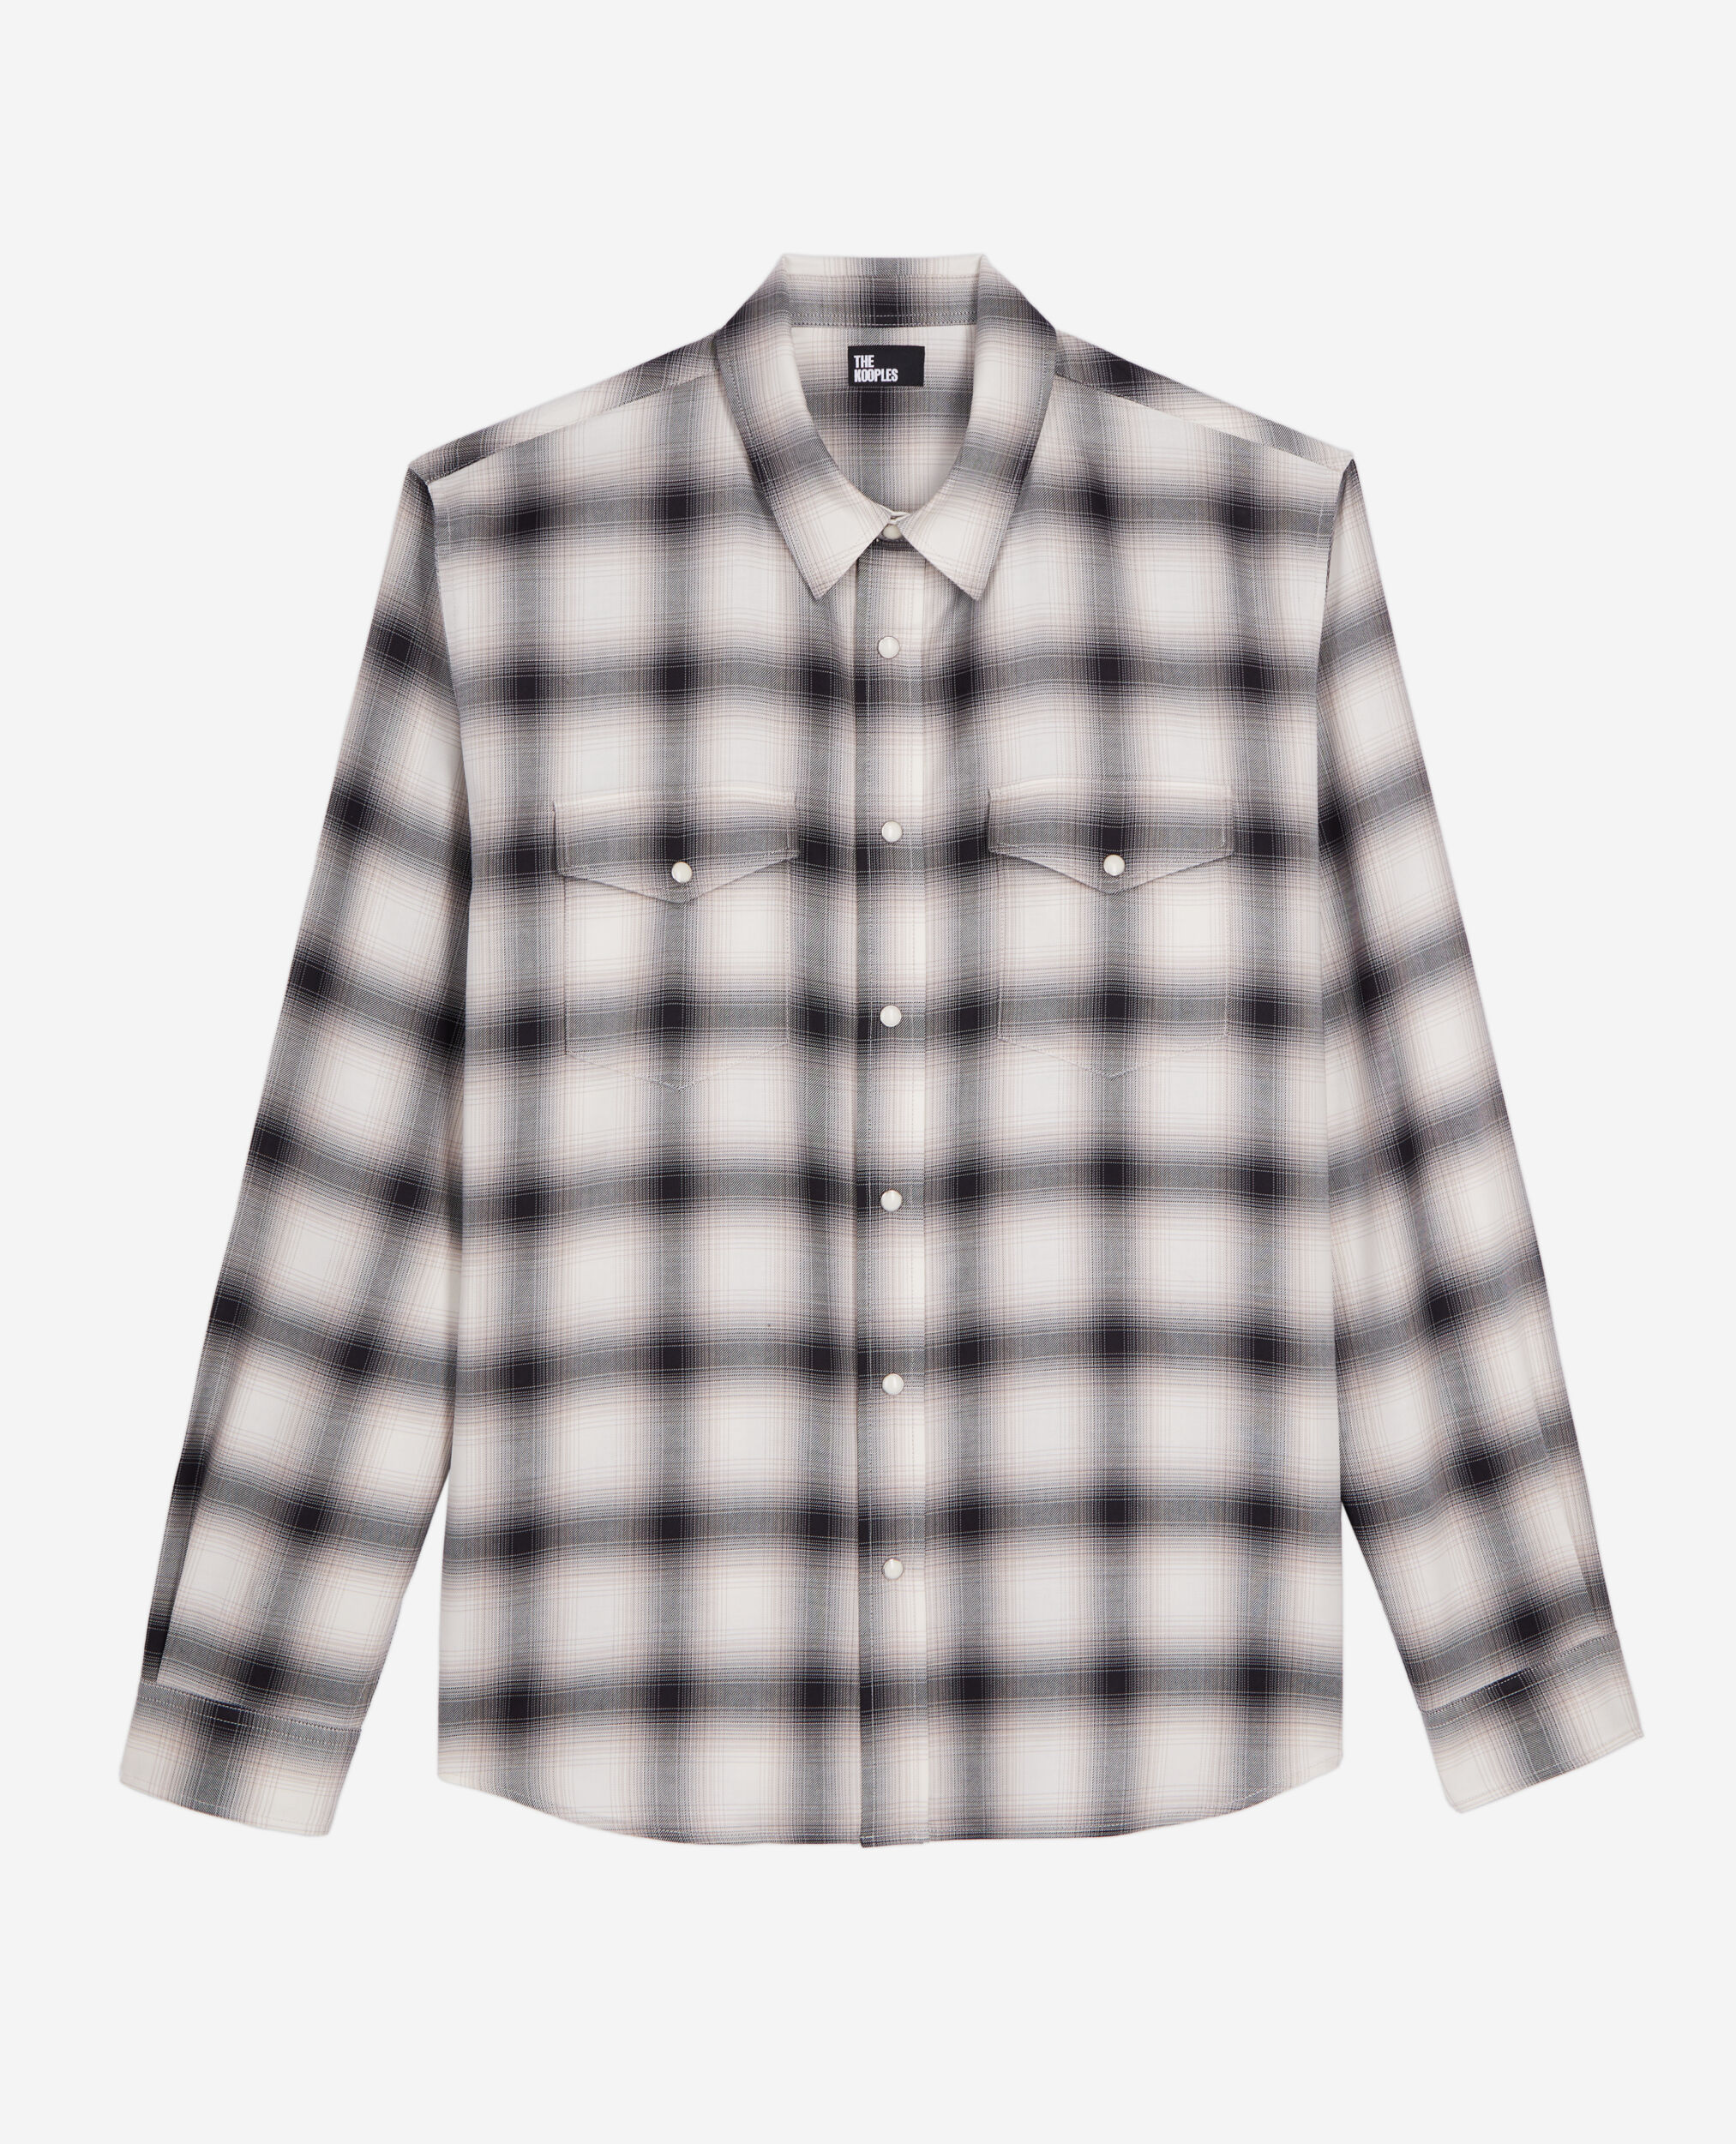 Checked shirt, BLACK GREY WHITE, hi-res image number null